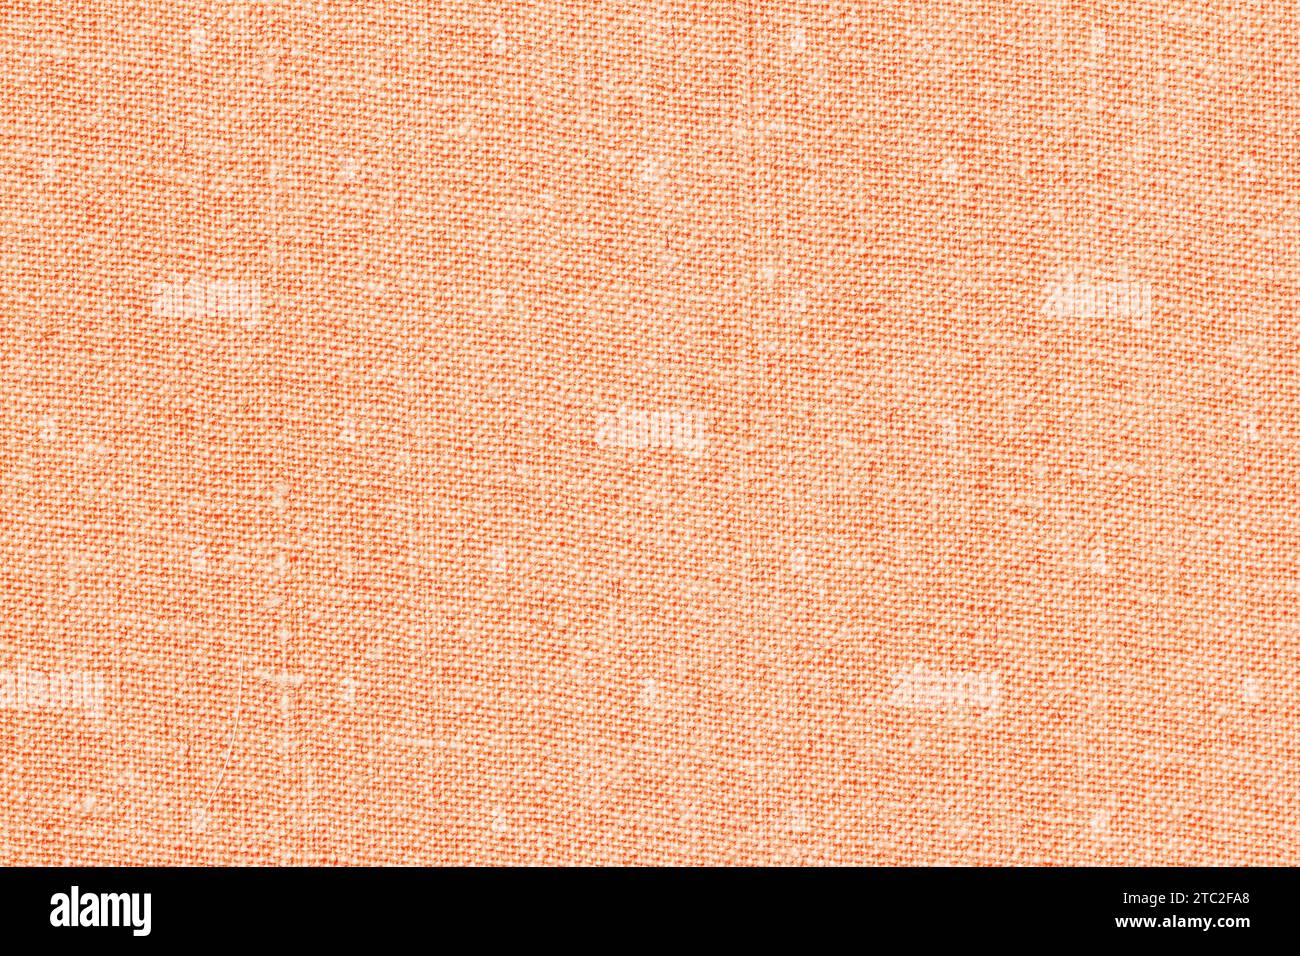 Fabric texture of peach color, natural background for design Stock Photo